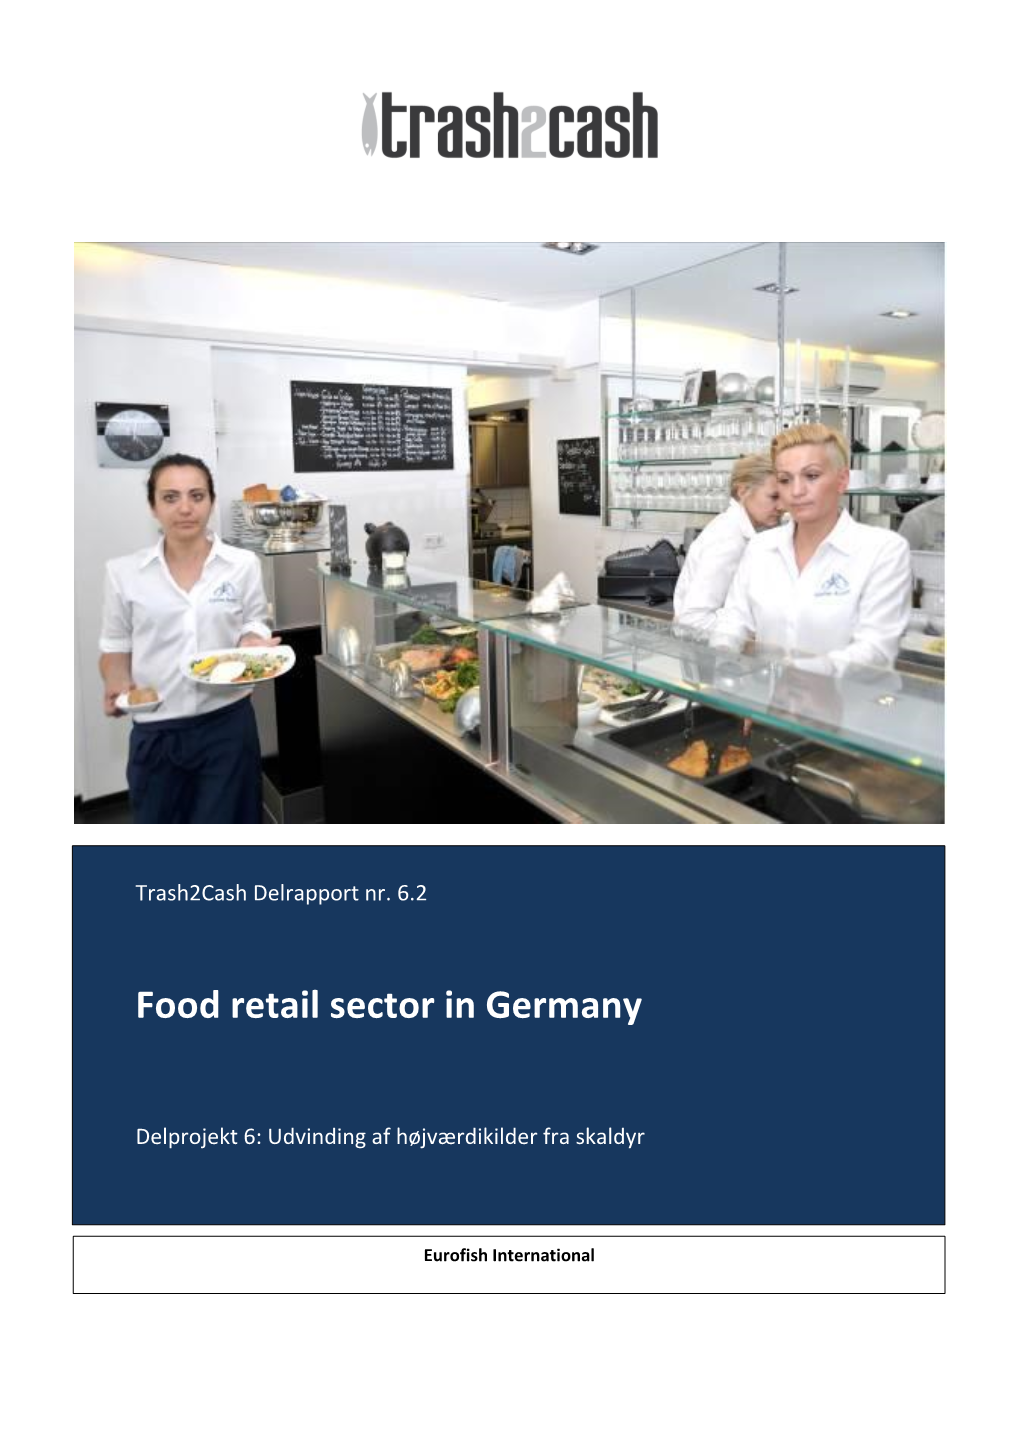 Food Retail Sector in Germany